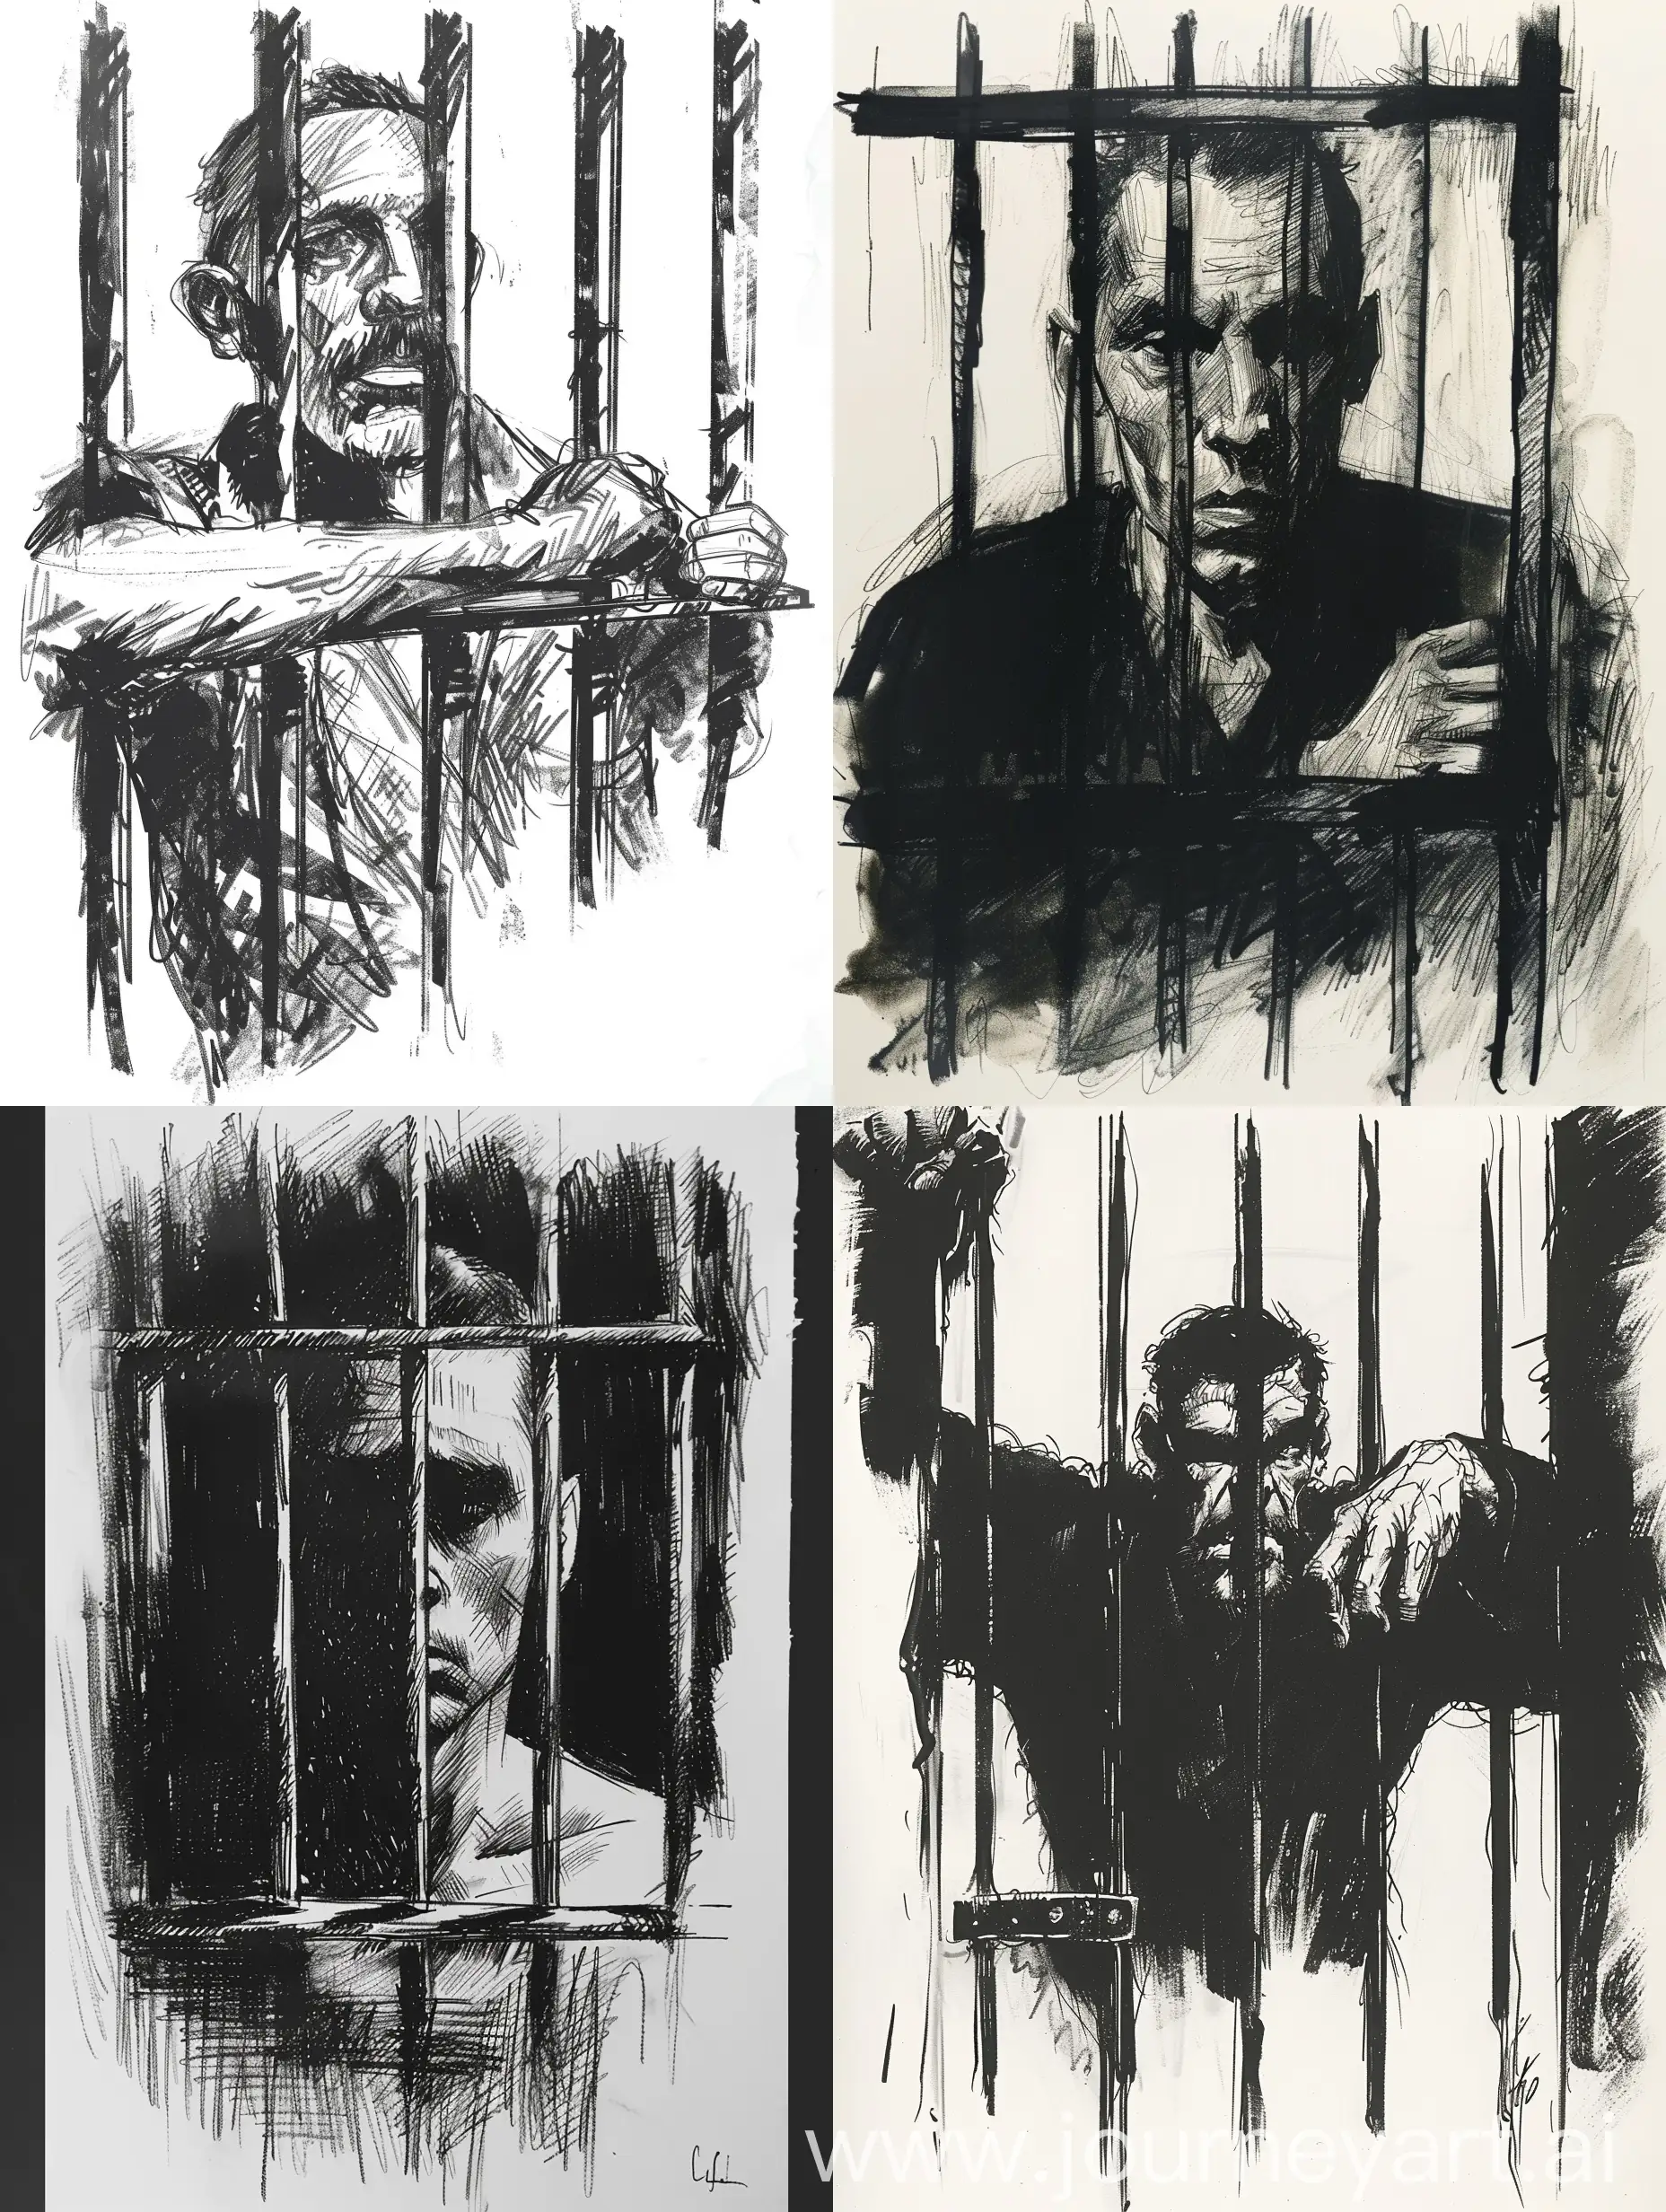 Black and white sketch of man behind bars